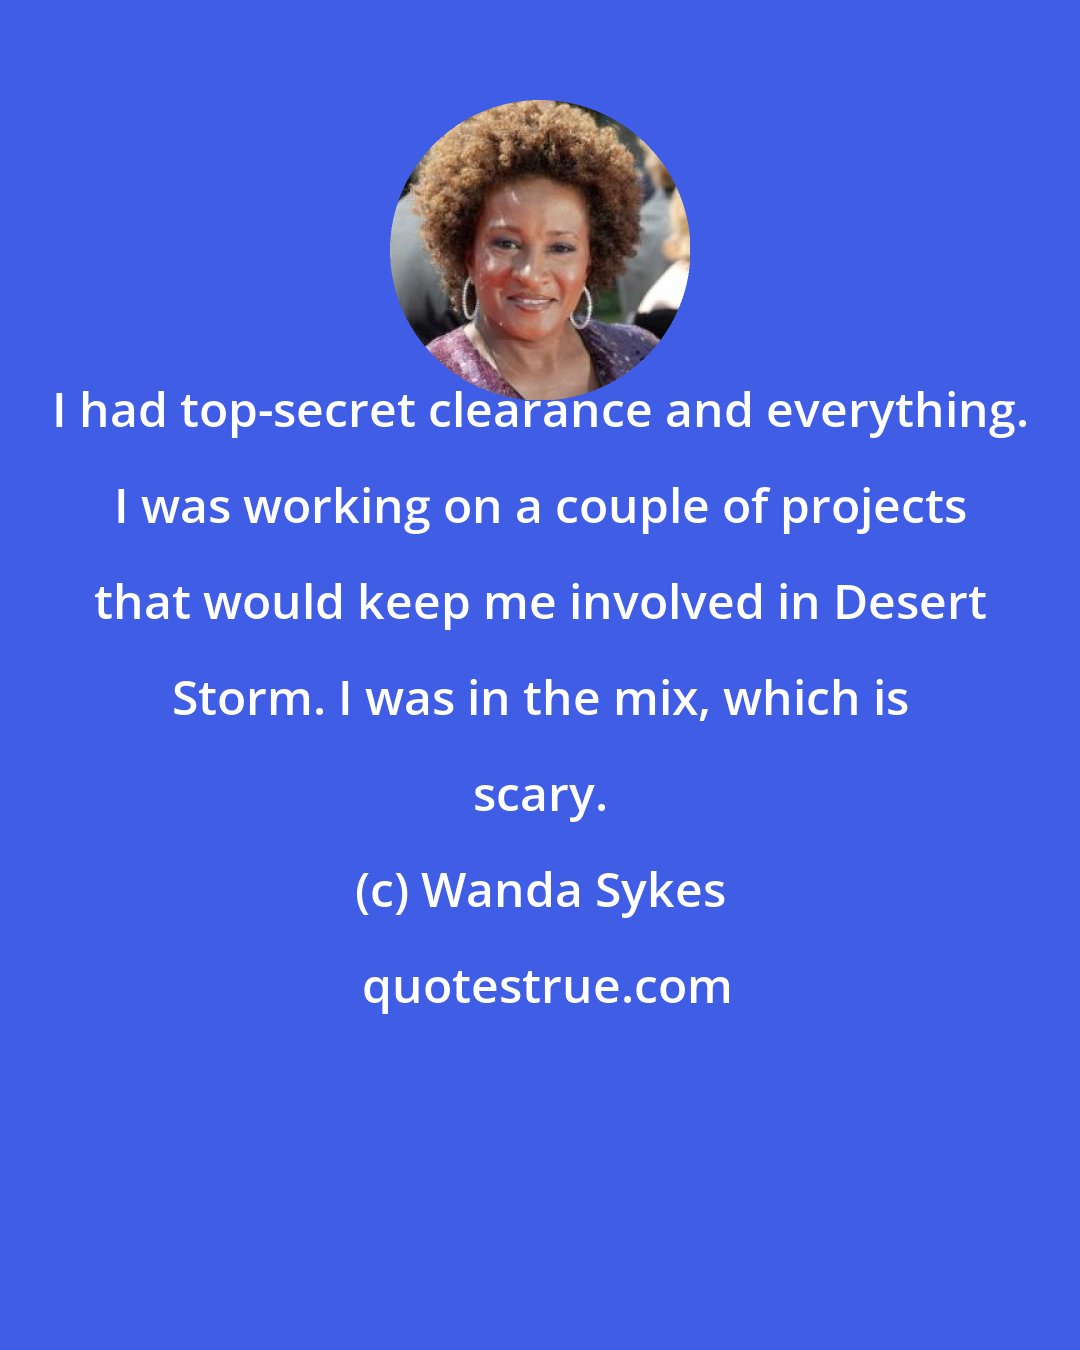 Wanda Sykes: I had top-secret clearance and everything. I was working on a couple of projects that would keep me involved in Desert Storm. I was in the mix, which is scary.